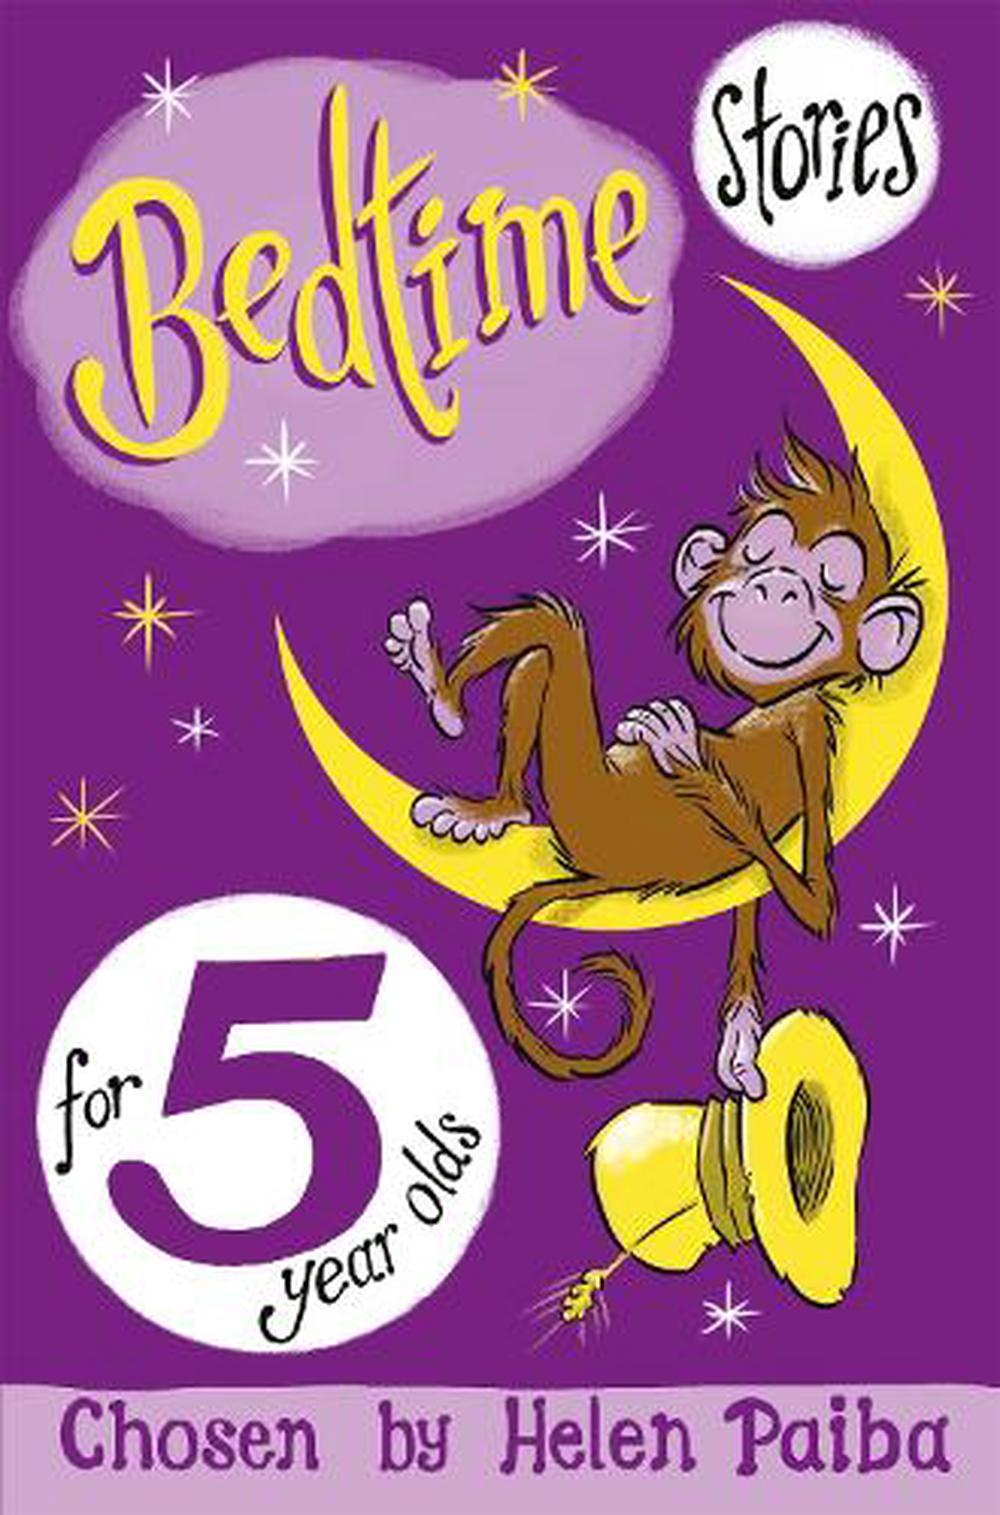 bedtime-stories-for-5-year-olds-by-helen-paiba-paperback